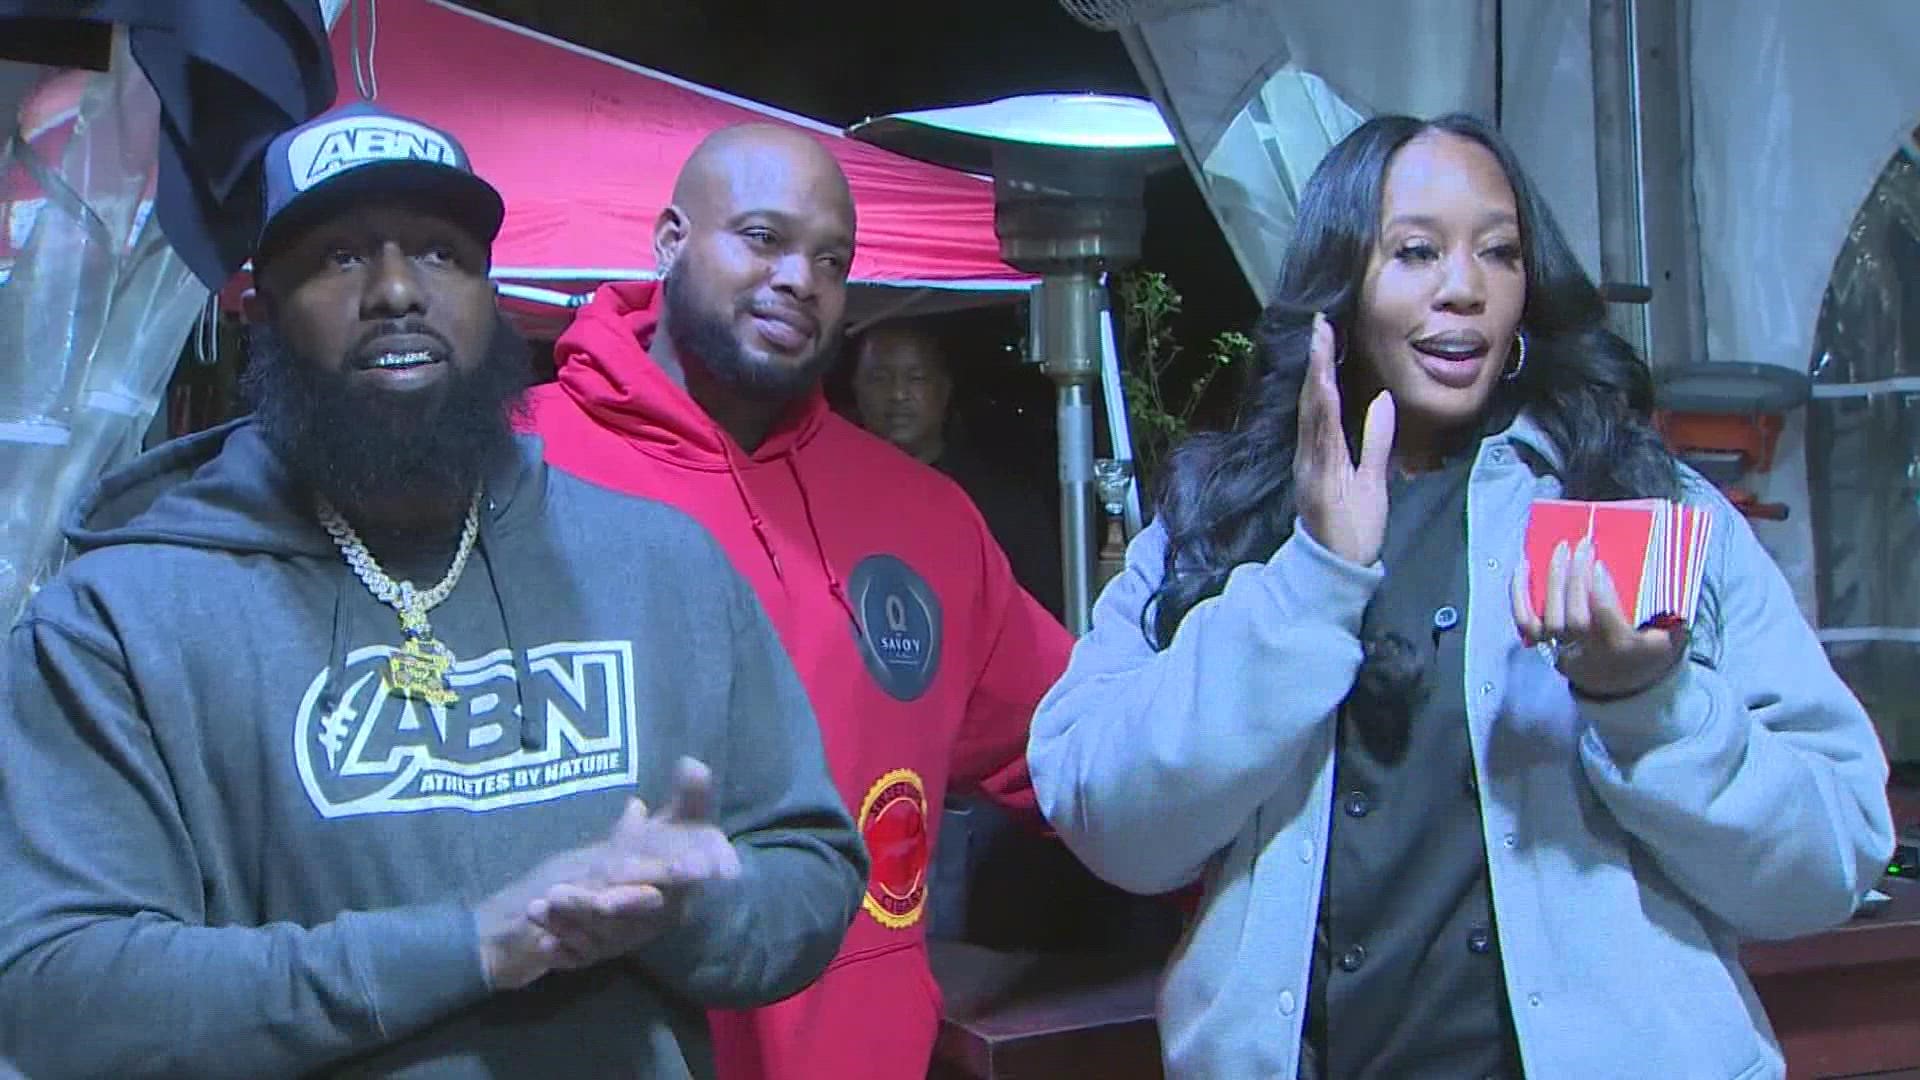 Trae tha Truth and his Relief Gang, along with the owners of Turkey Leg Hut, teamed up for a second time to dish out free meals ahead of Thanksgiving.